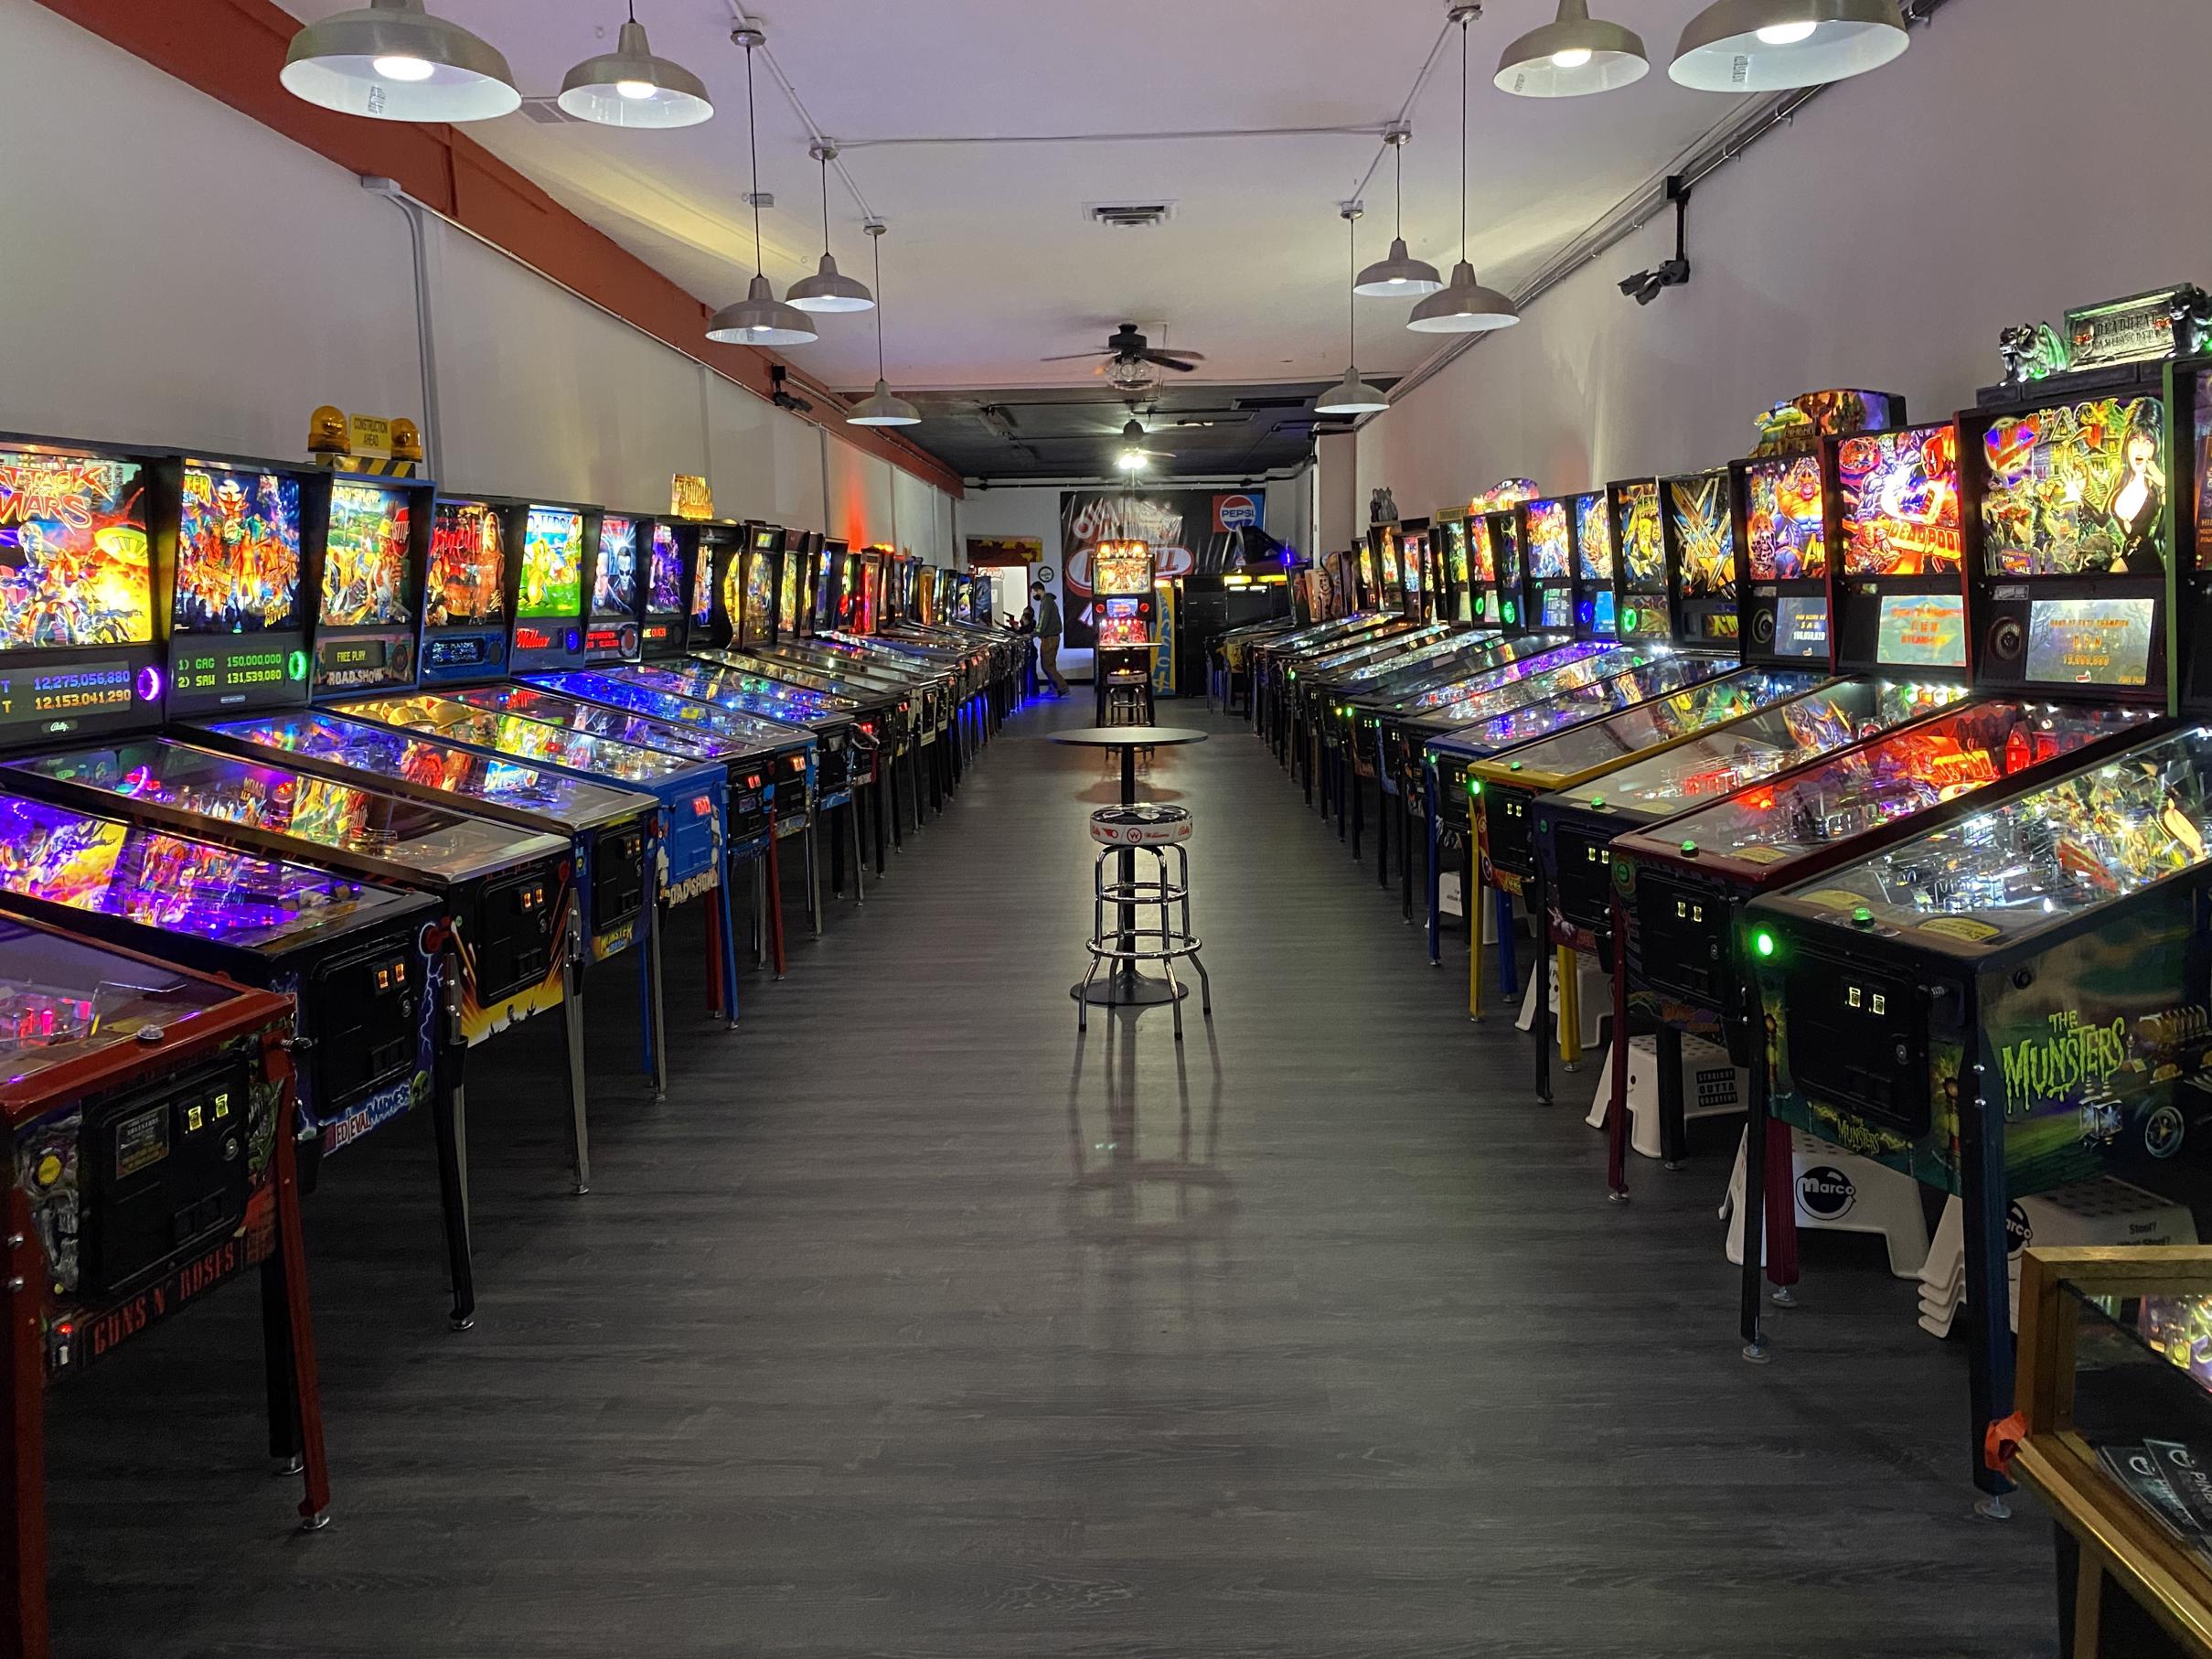 Visit the Olympia Pinball Museum for Hands on Fun the Whole Family